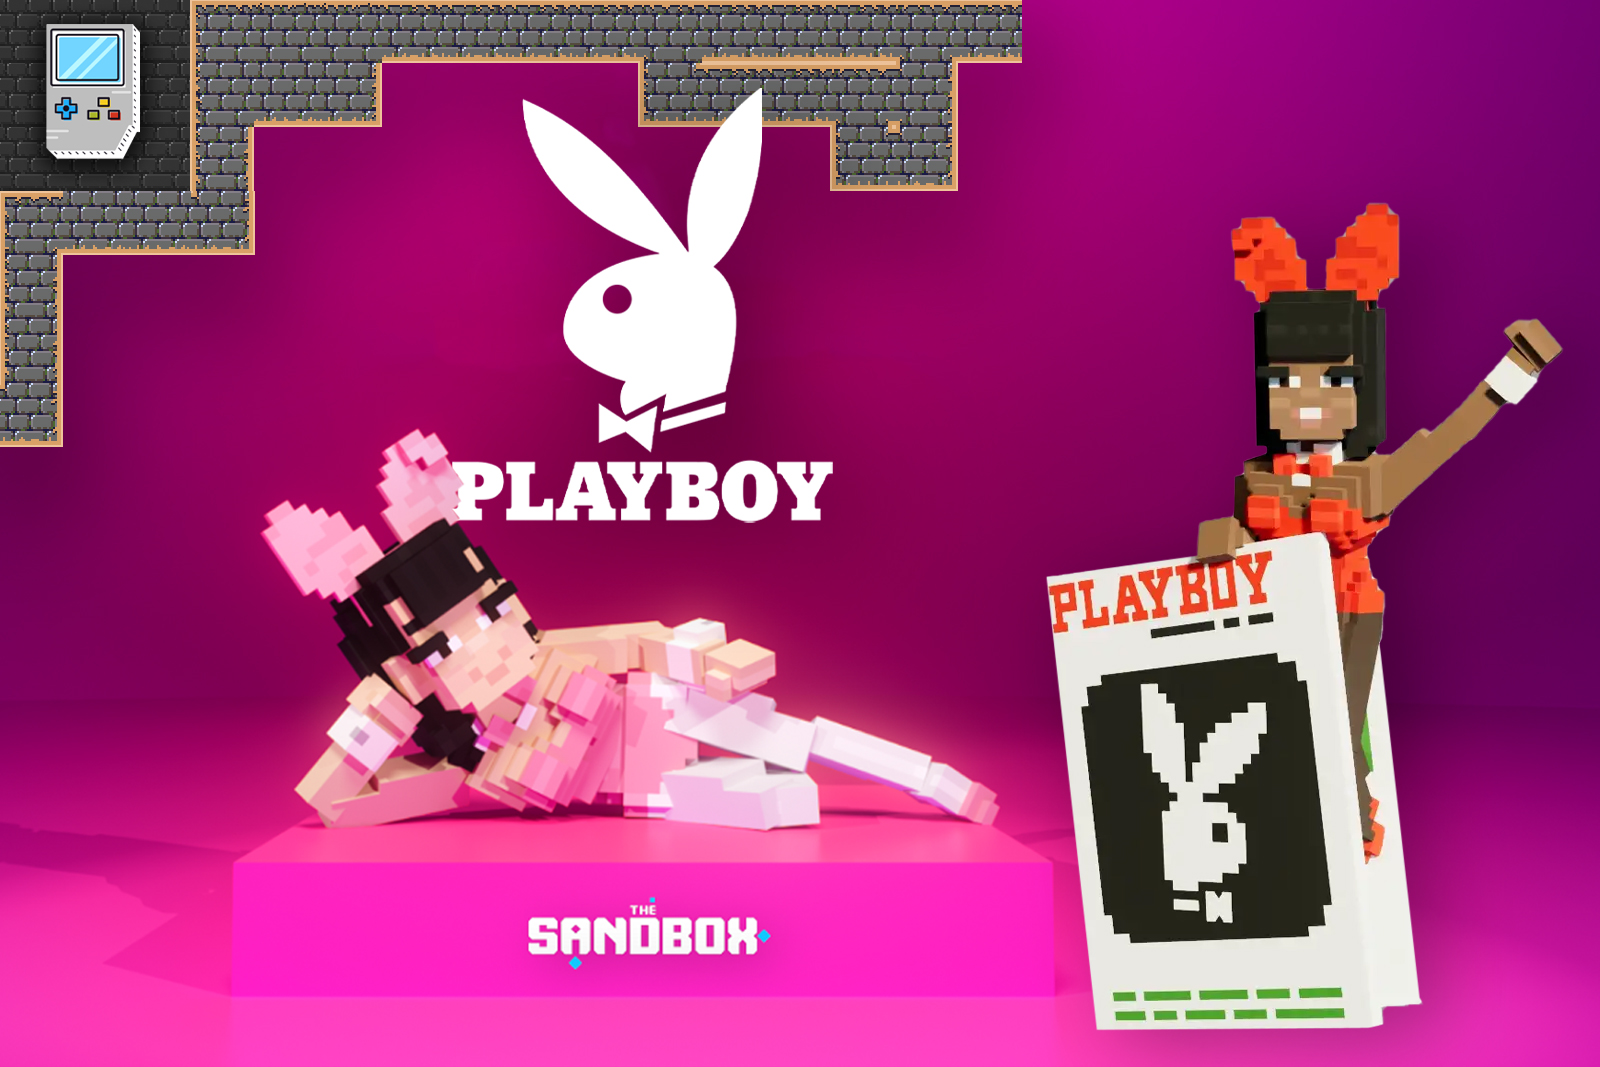 A playboy logo next to a cartoon girl with bunny air and pink clothes